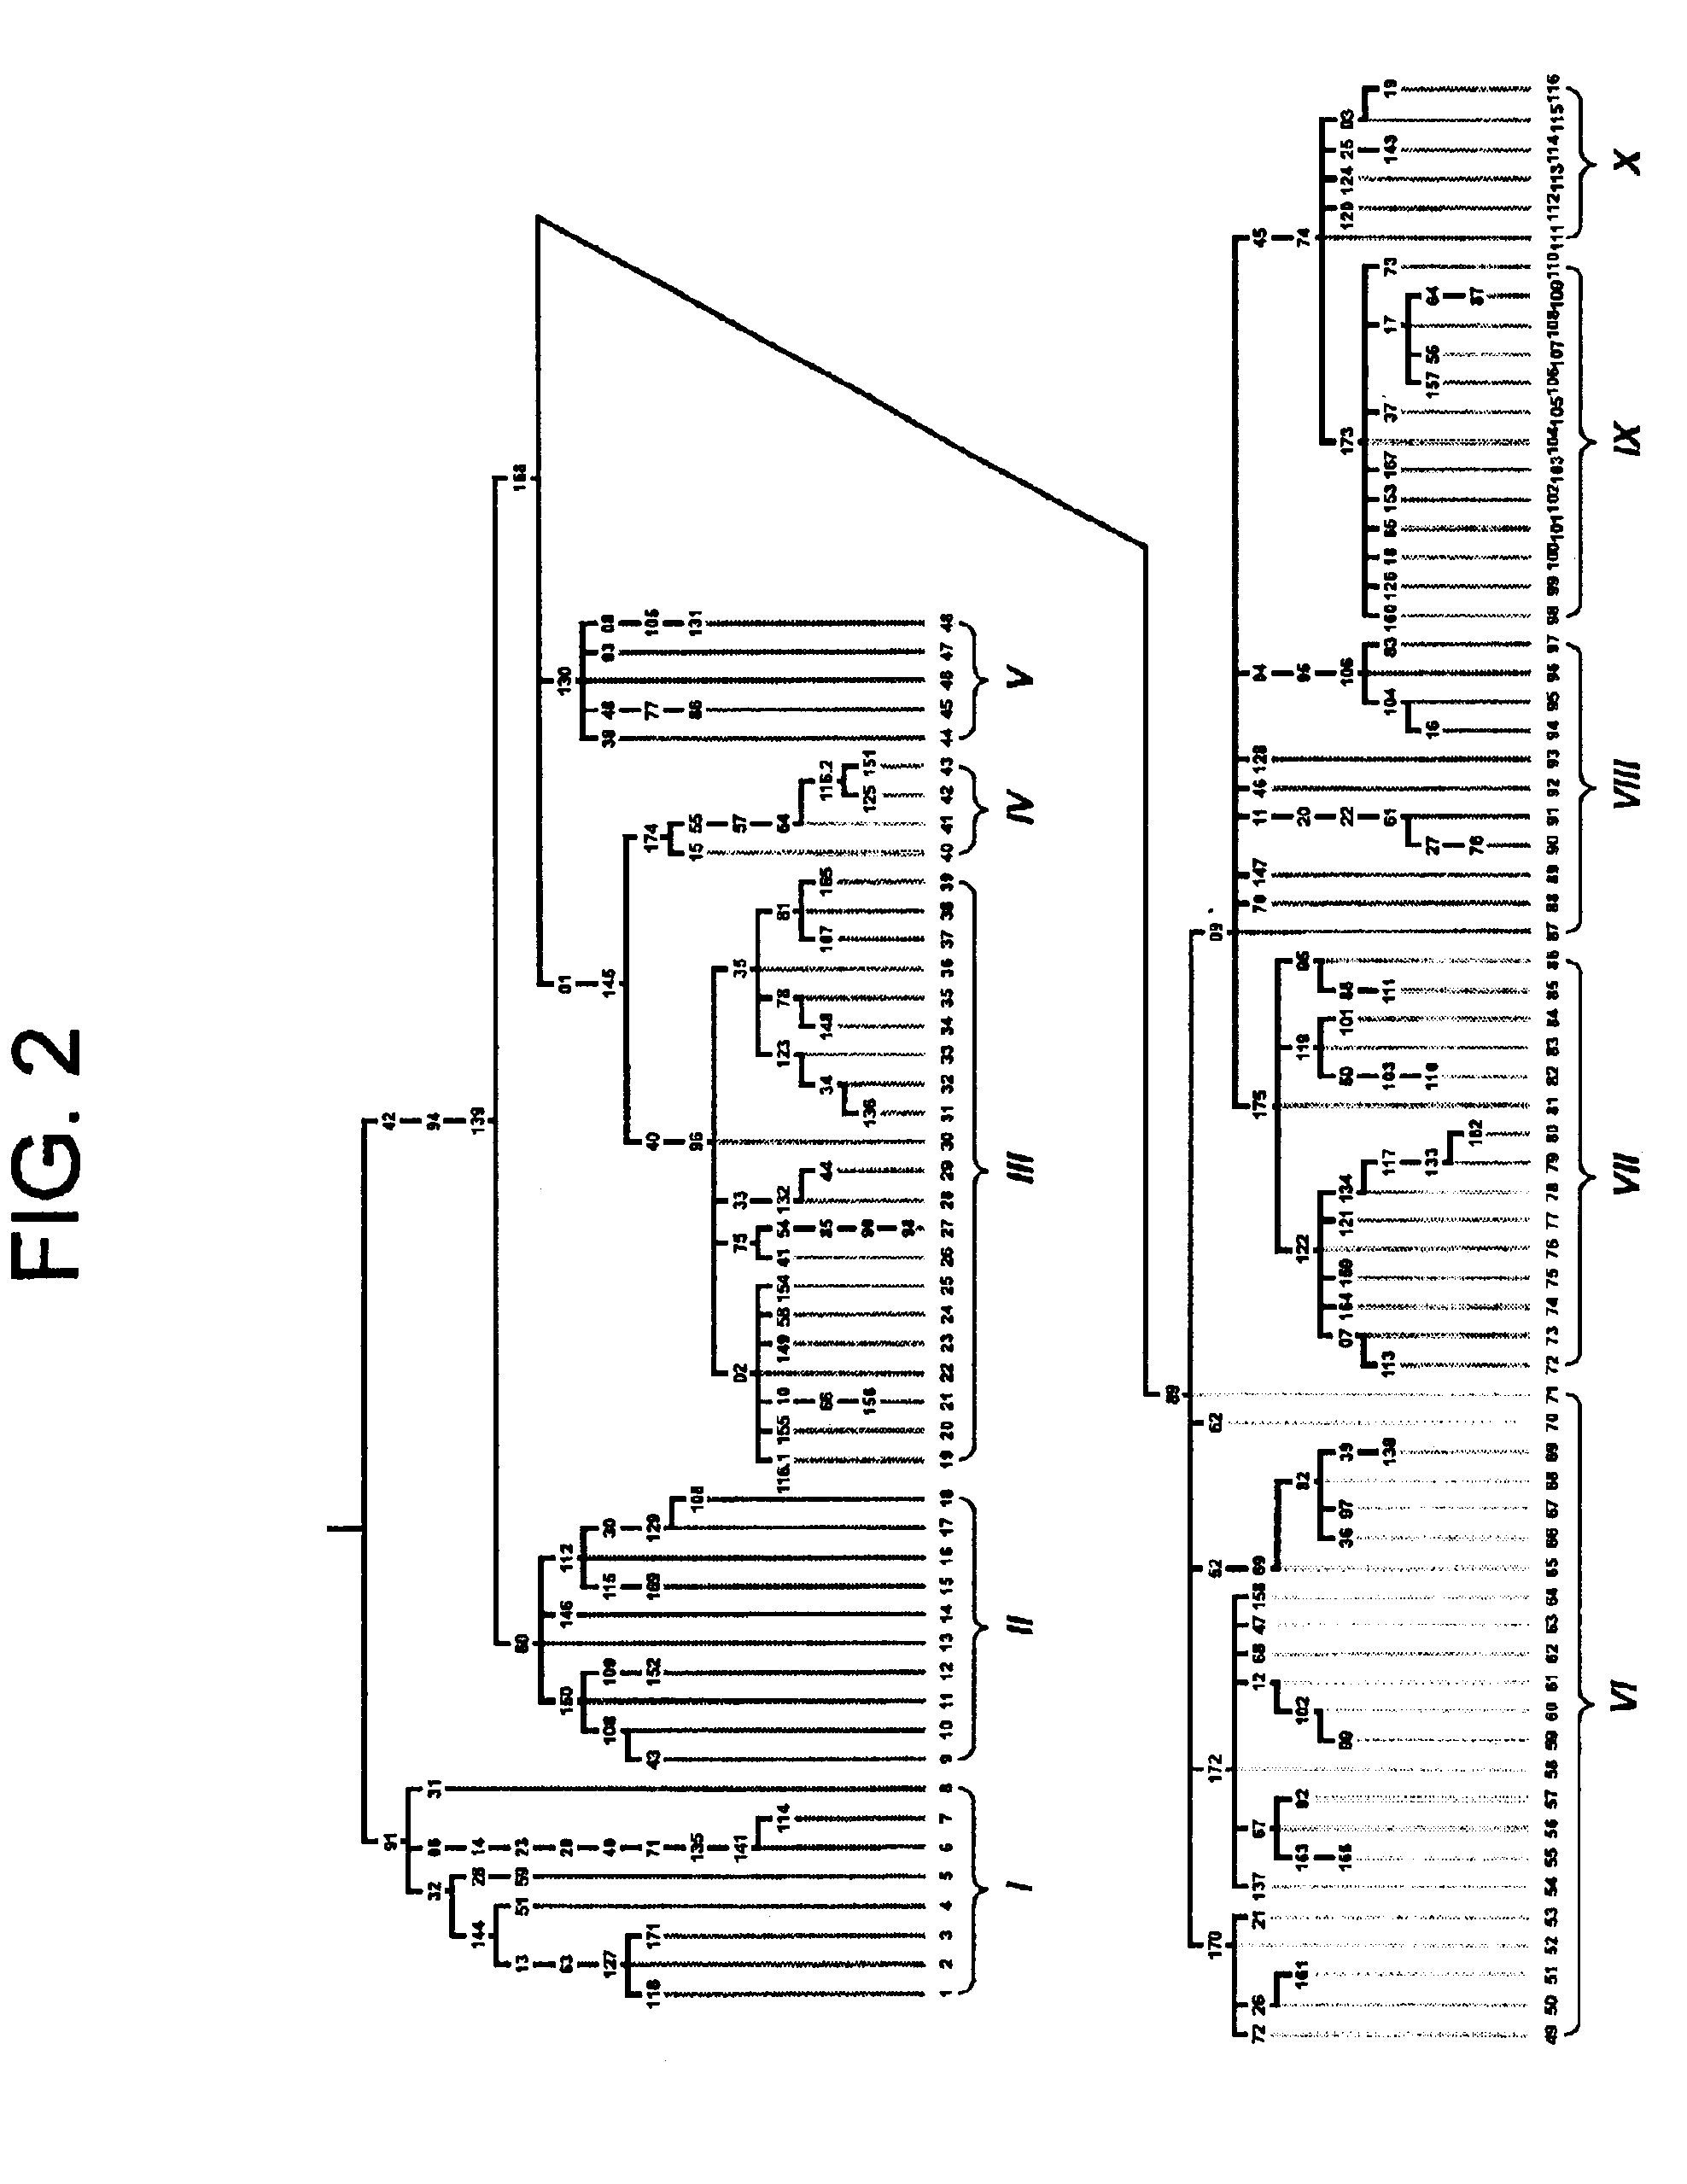 Method for determining genetic affiliation, substructure and gene flow within human populations